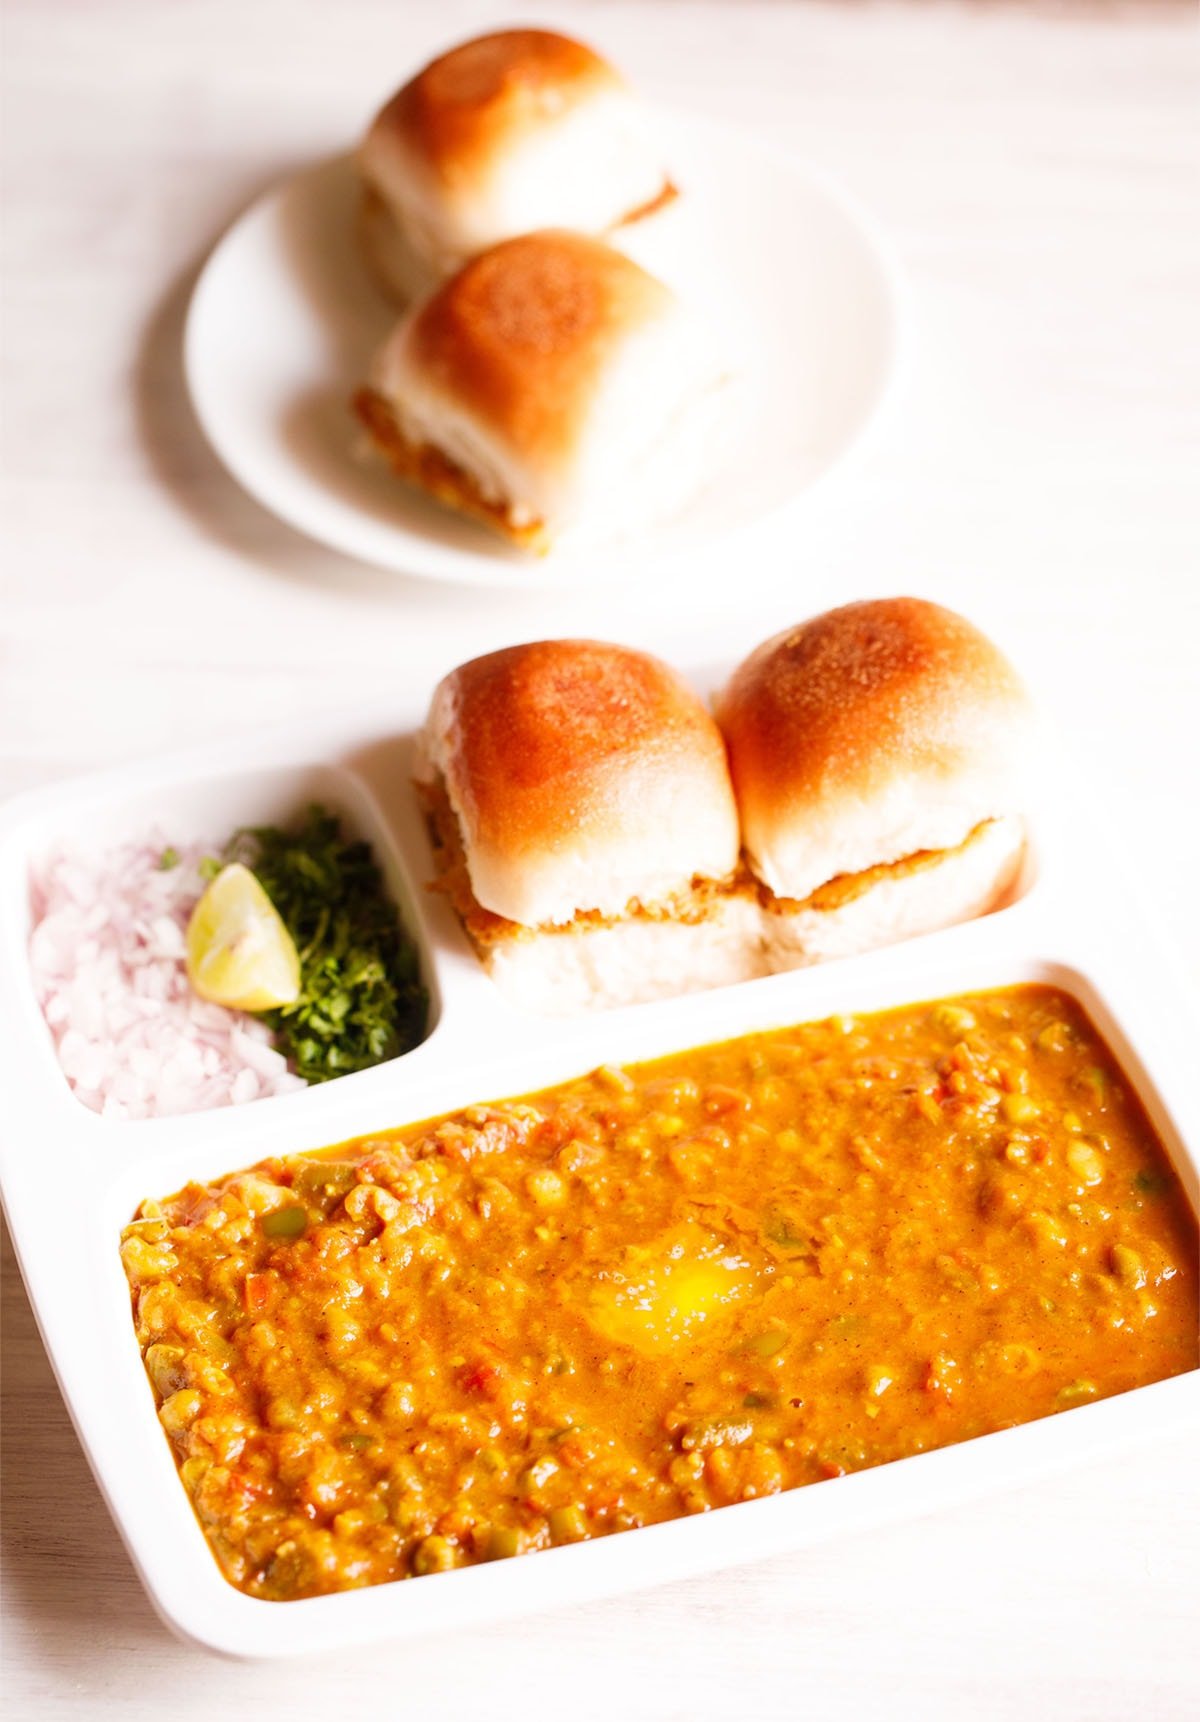 mumbai pav bhaji served in a rectangular serving tray with buttered pav and chopped onions, coriander leaves and lemon wedges on a white table